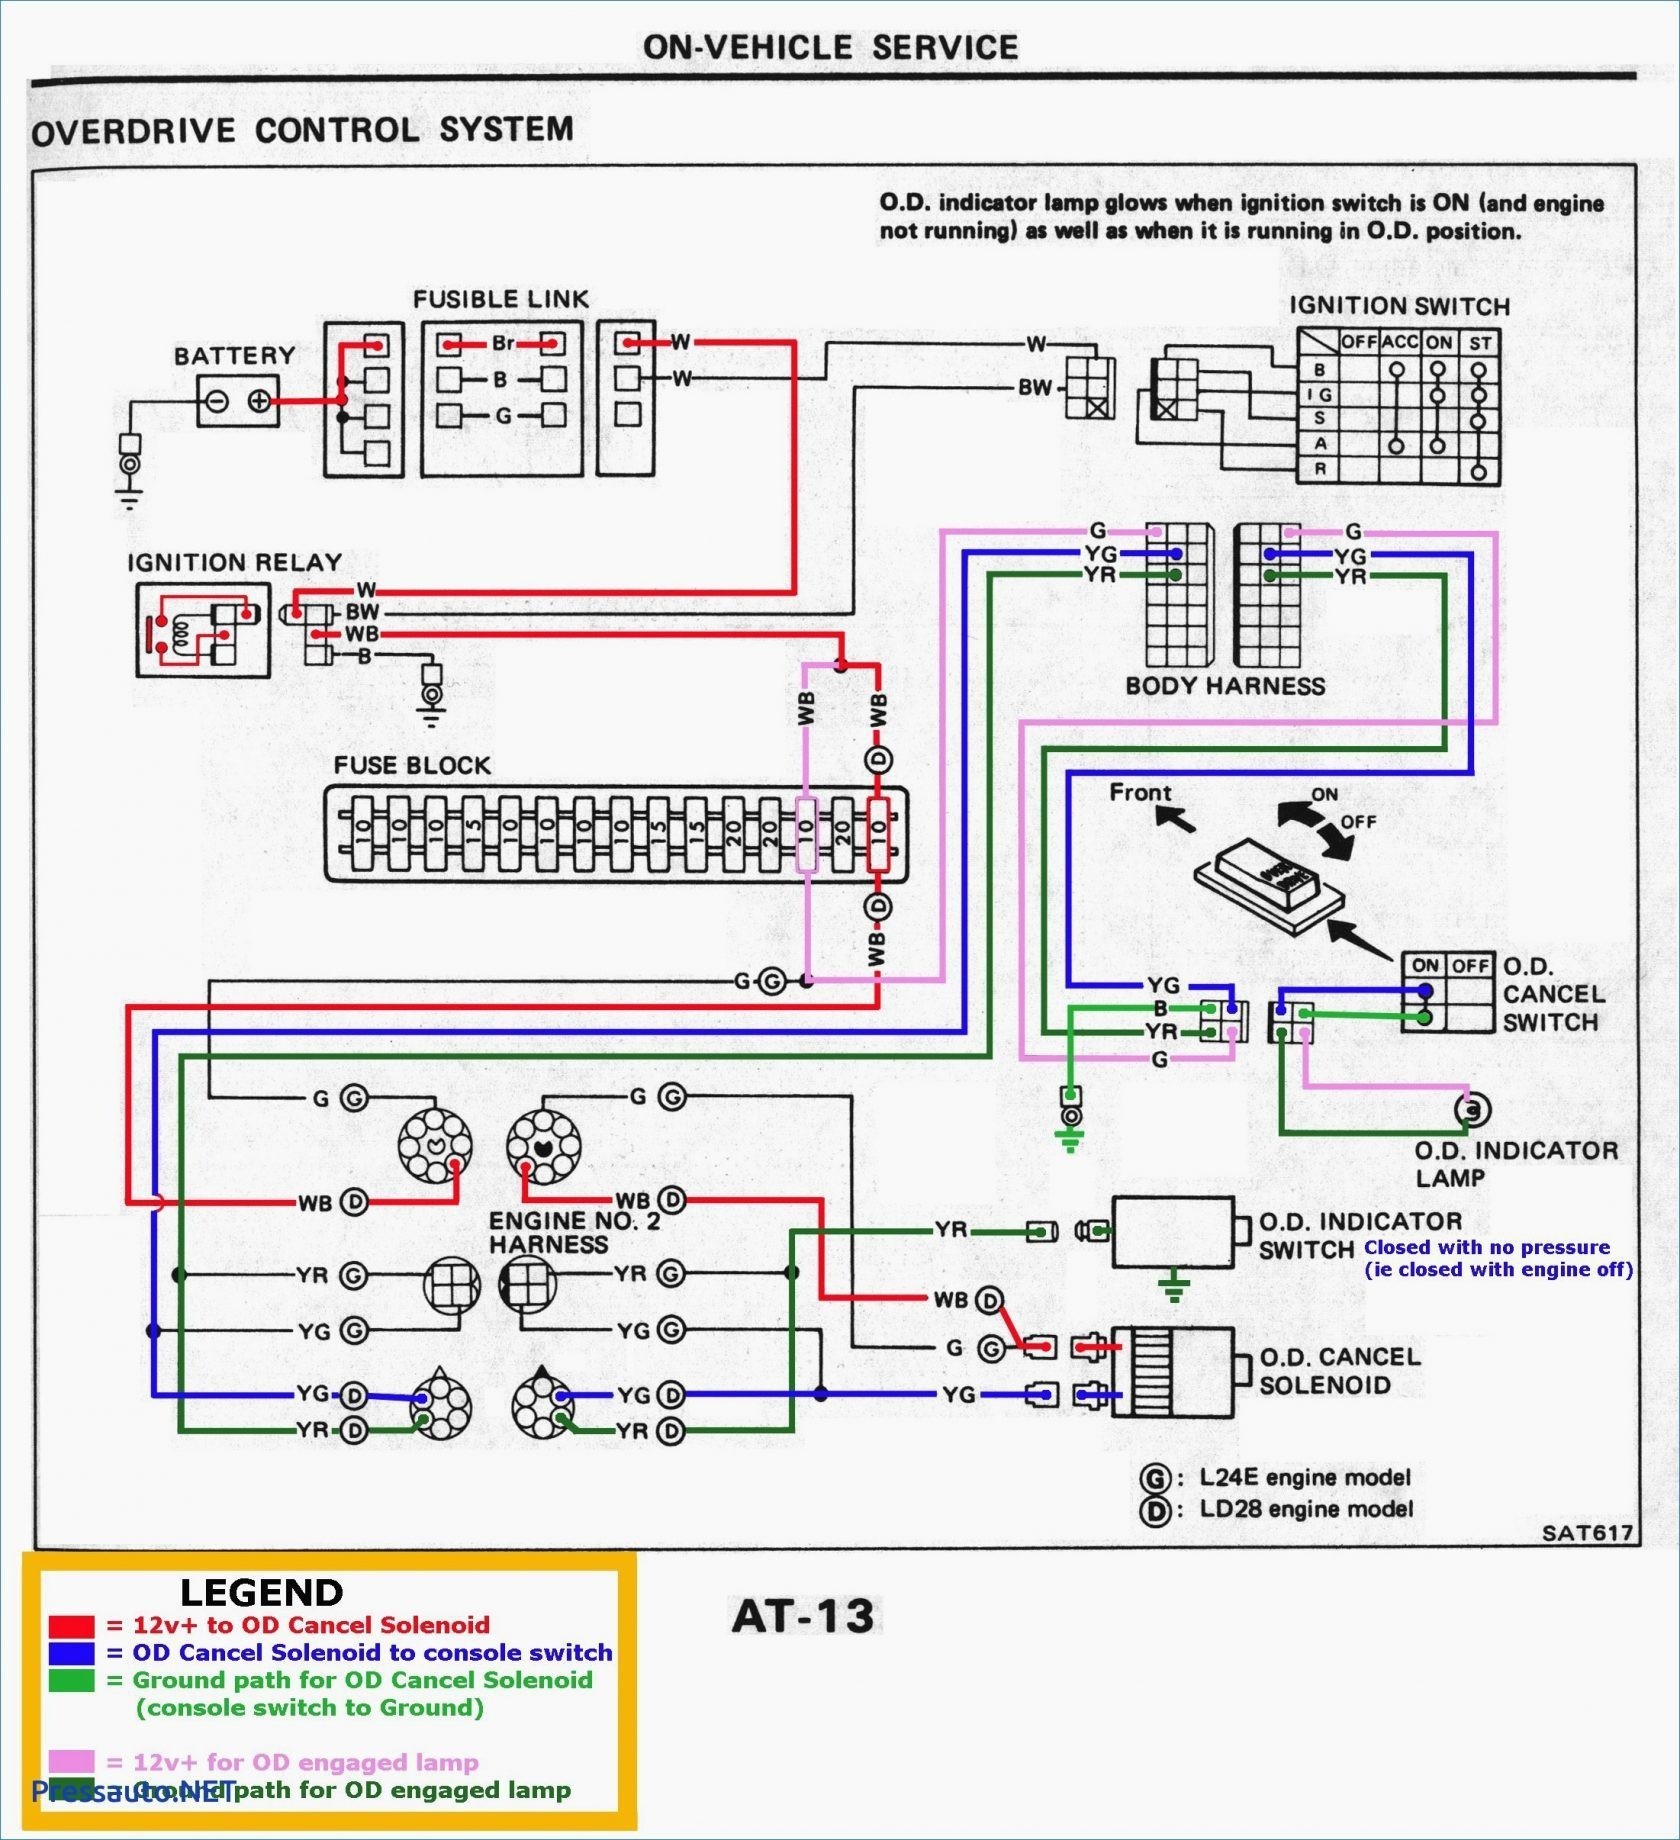 Wiring Diagram for Emergency Stop button New Wiring Diagram for Push button Start Inspirationa Ignition Relay